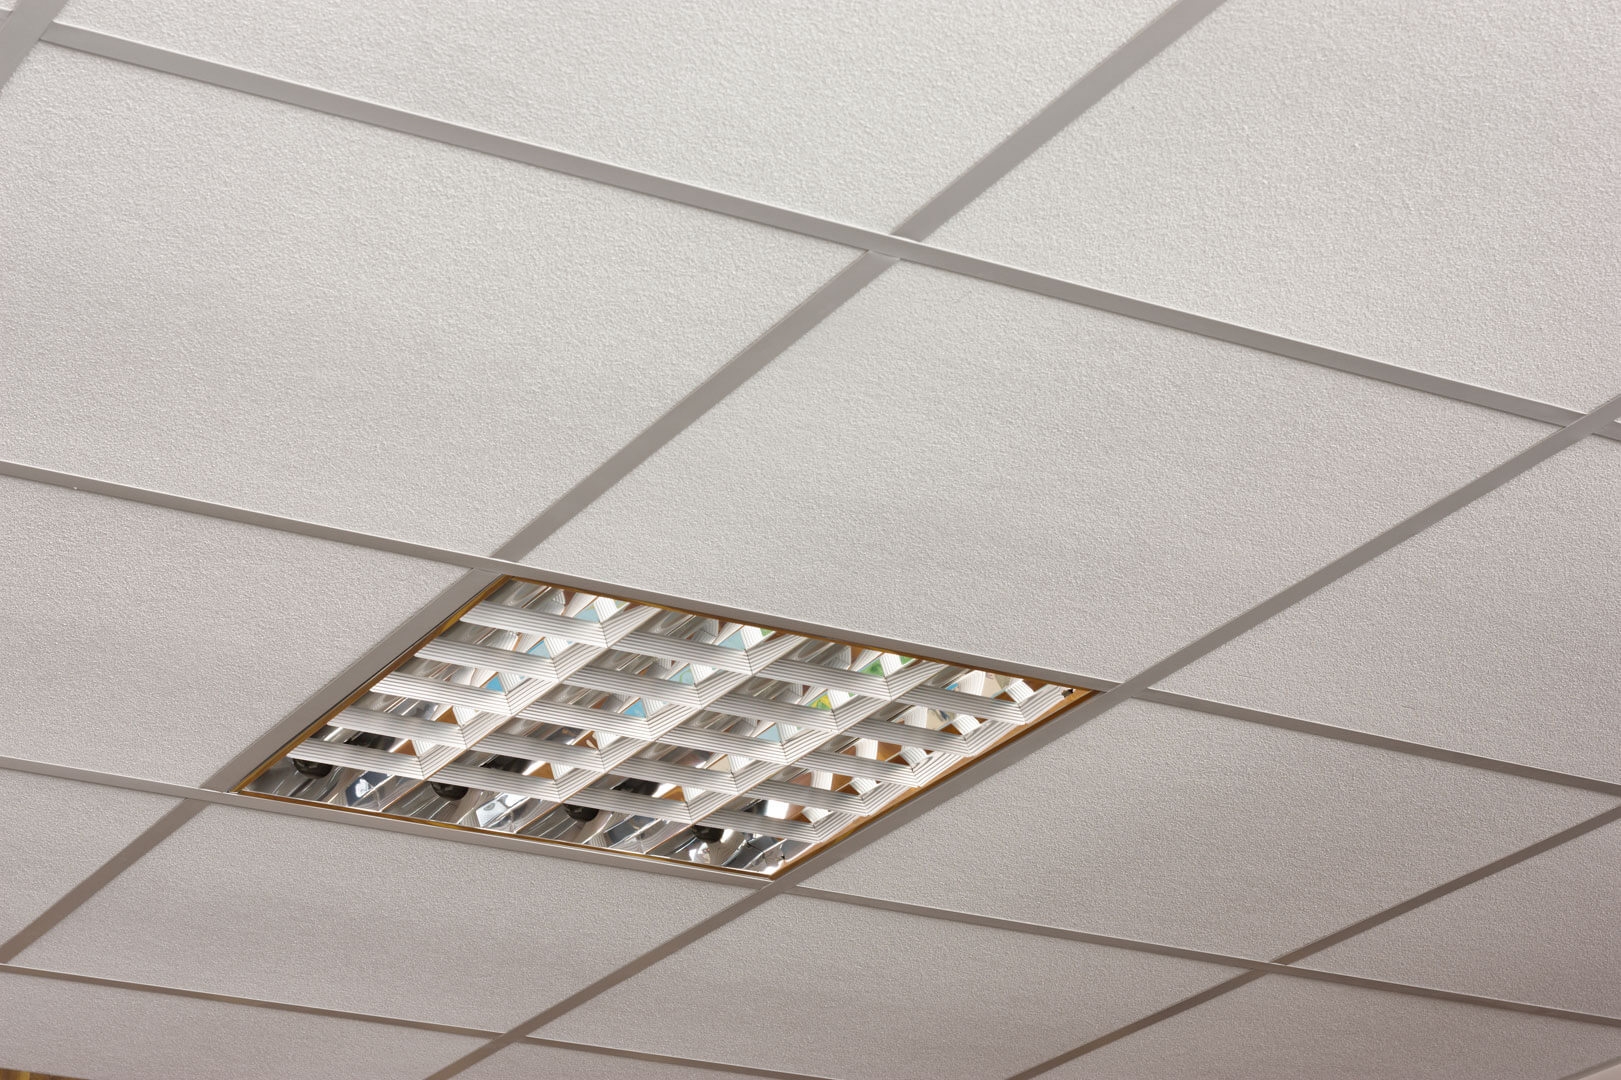 Armstrong Drop Ceiling Tiles 2x4 Armstrong Drop Ceiling Tiles 2×4 ceiling tiles lights accessories a leading uk supplier of 1621 X 1080